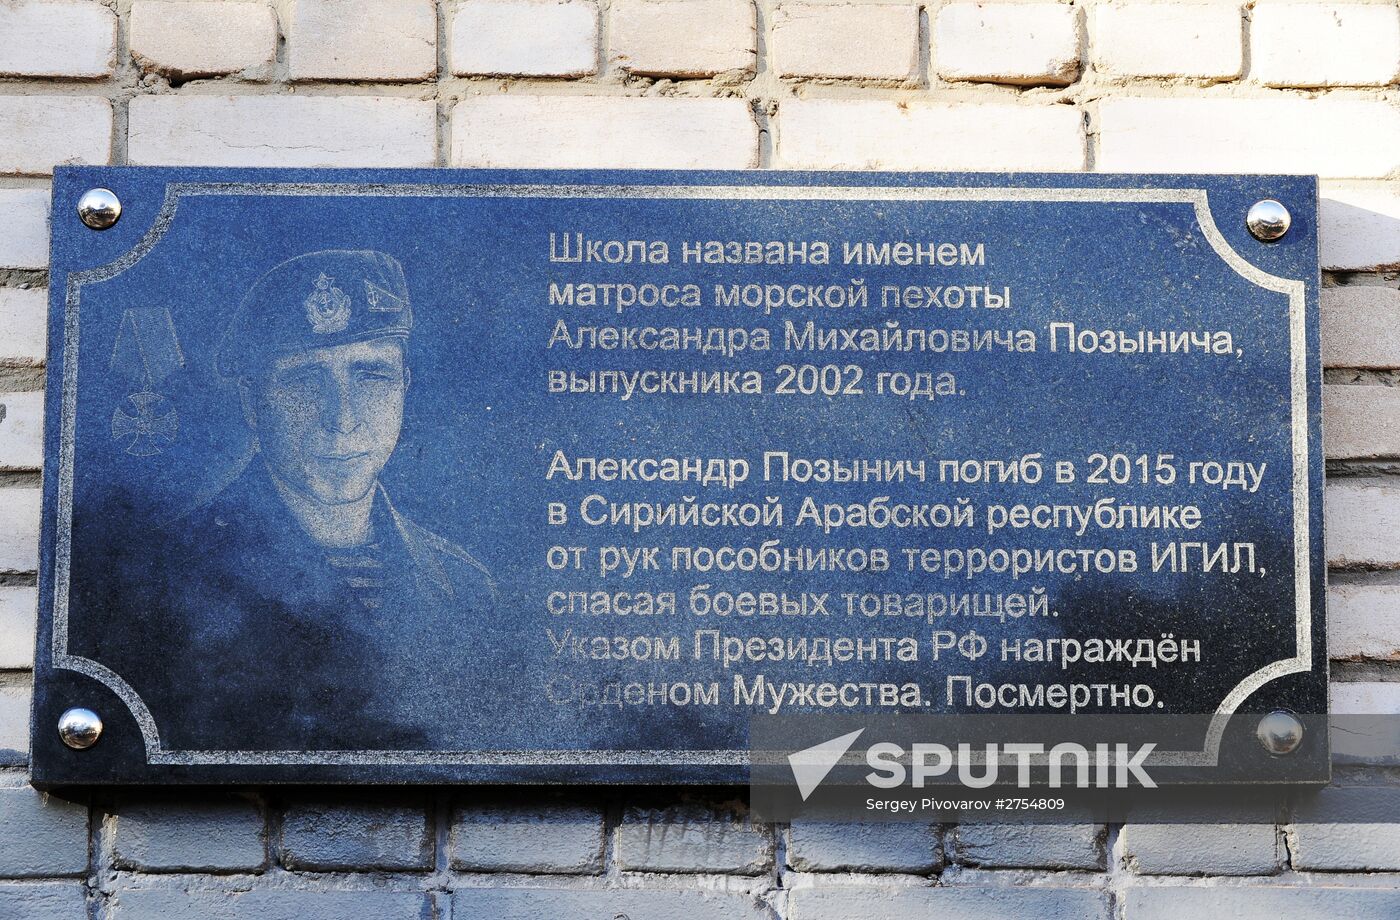 Unveliling of plaque in memory of marine Alexander Pozynich